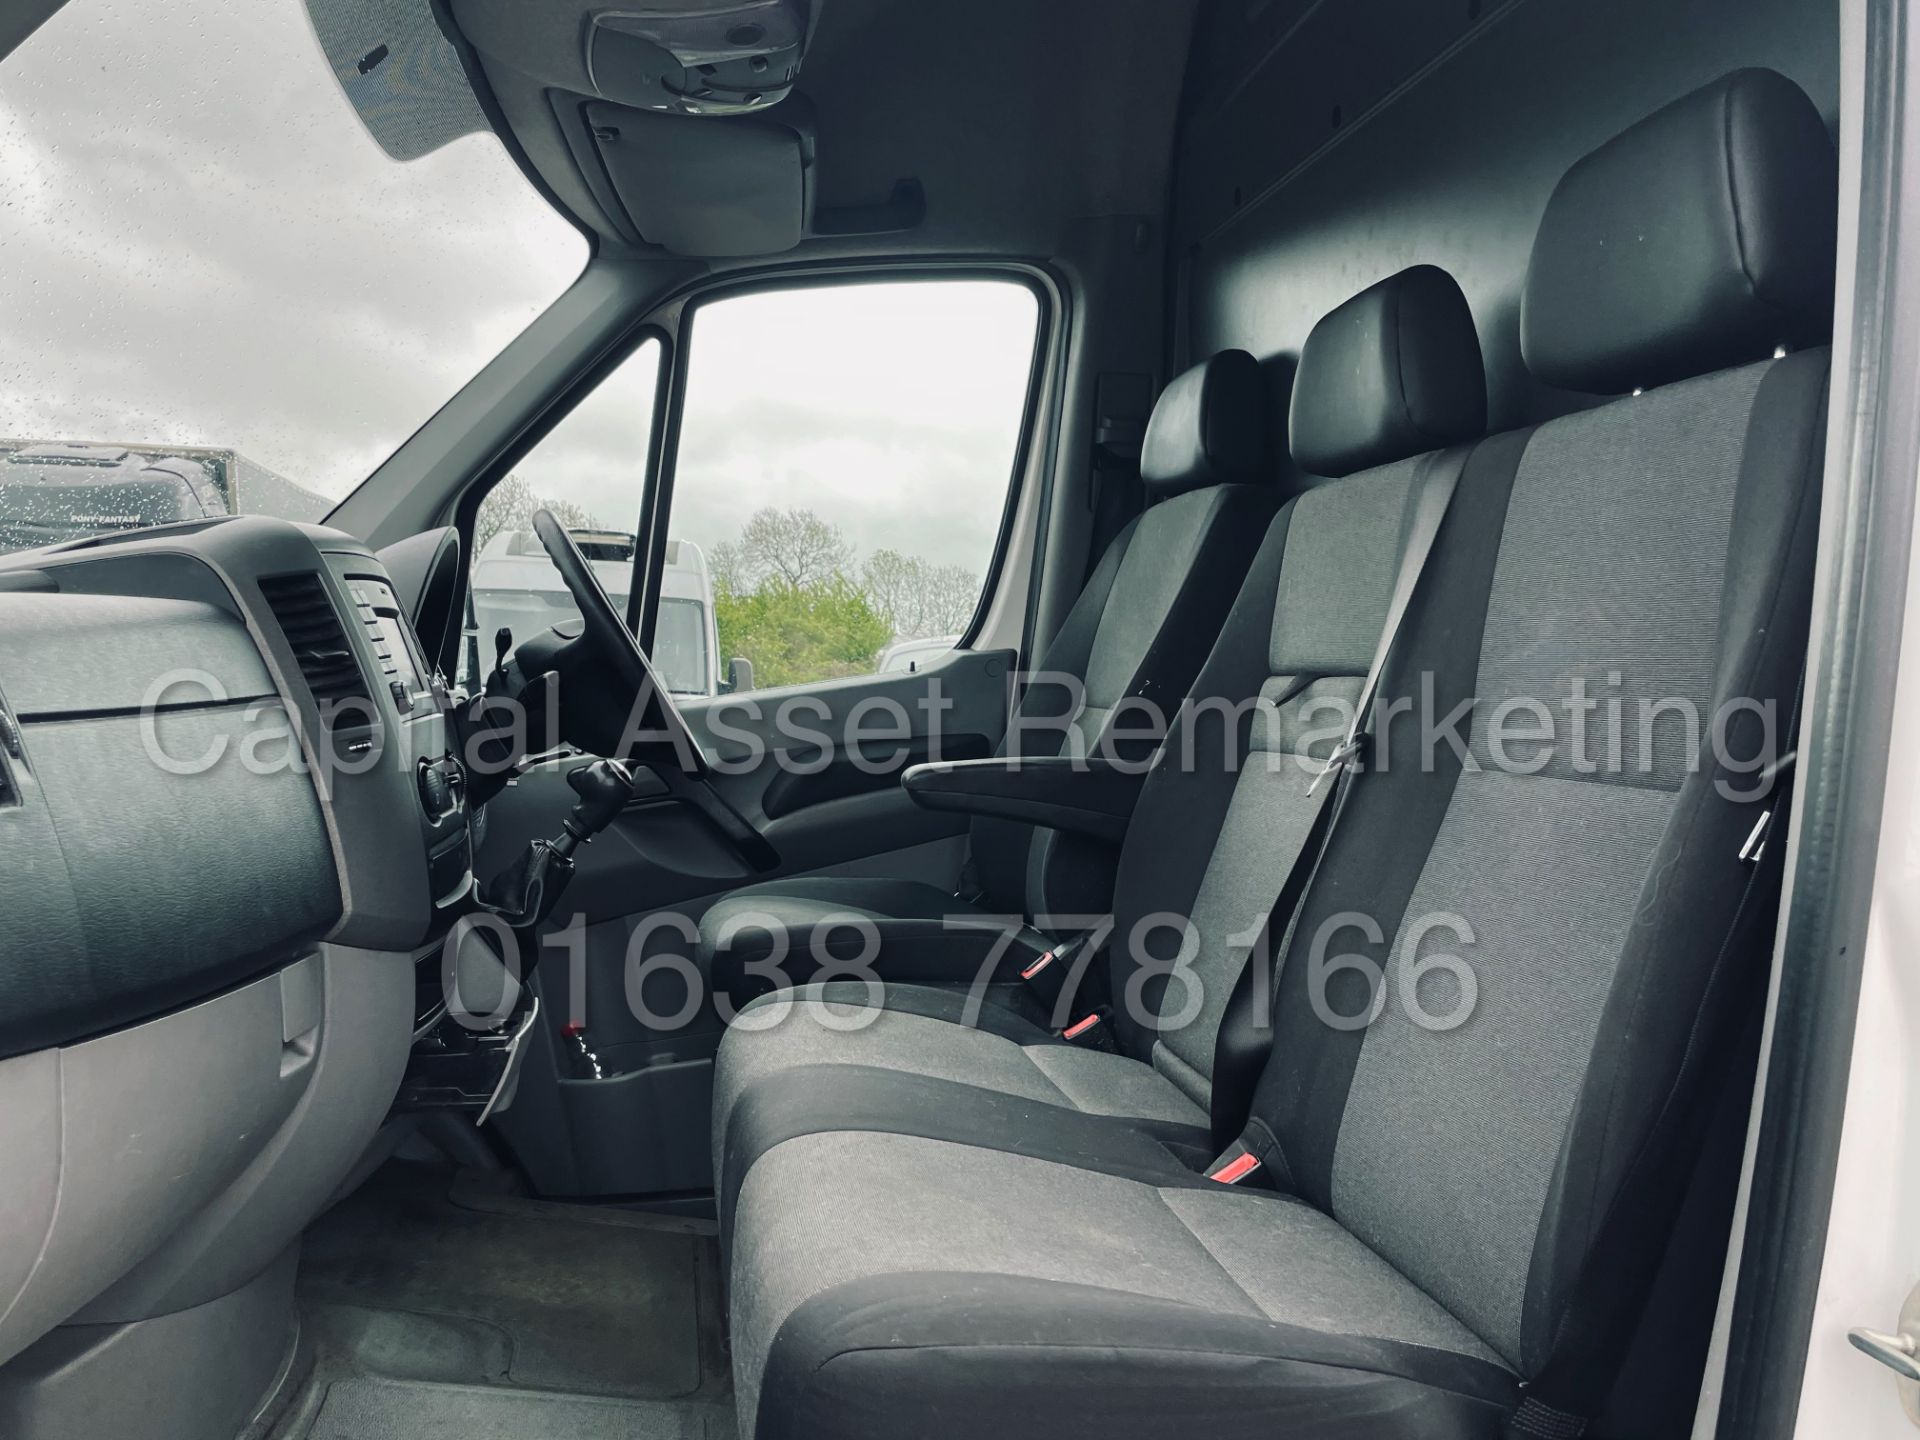 VOLKSWAGEN CRAFTER CR35 *LWB HI-ROOF* (2017 - EURO 6) '2.0 TDI BMT - 6 SPEED' *CRUISE CONTROL* - Image 21 of 39